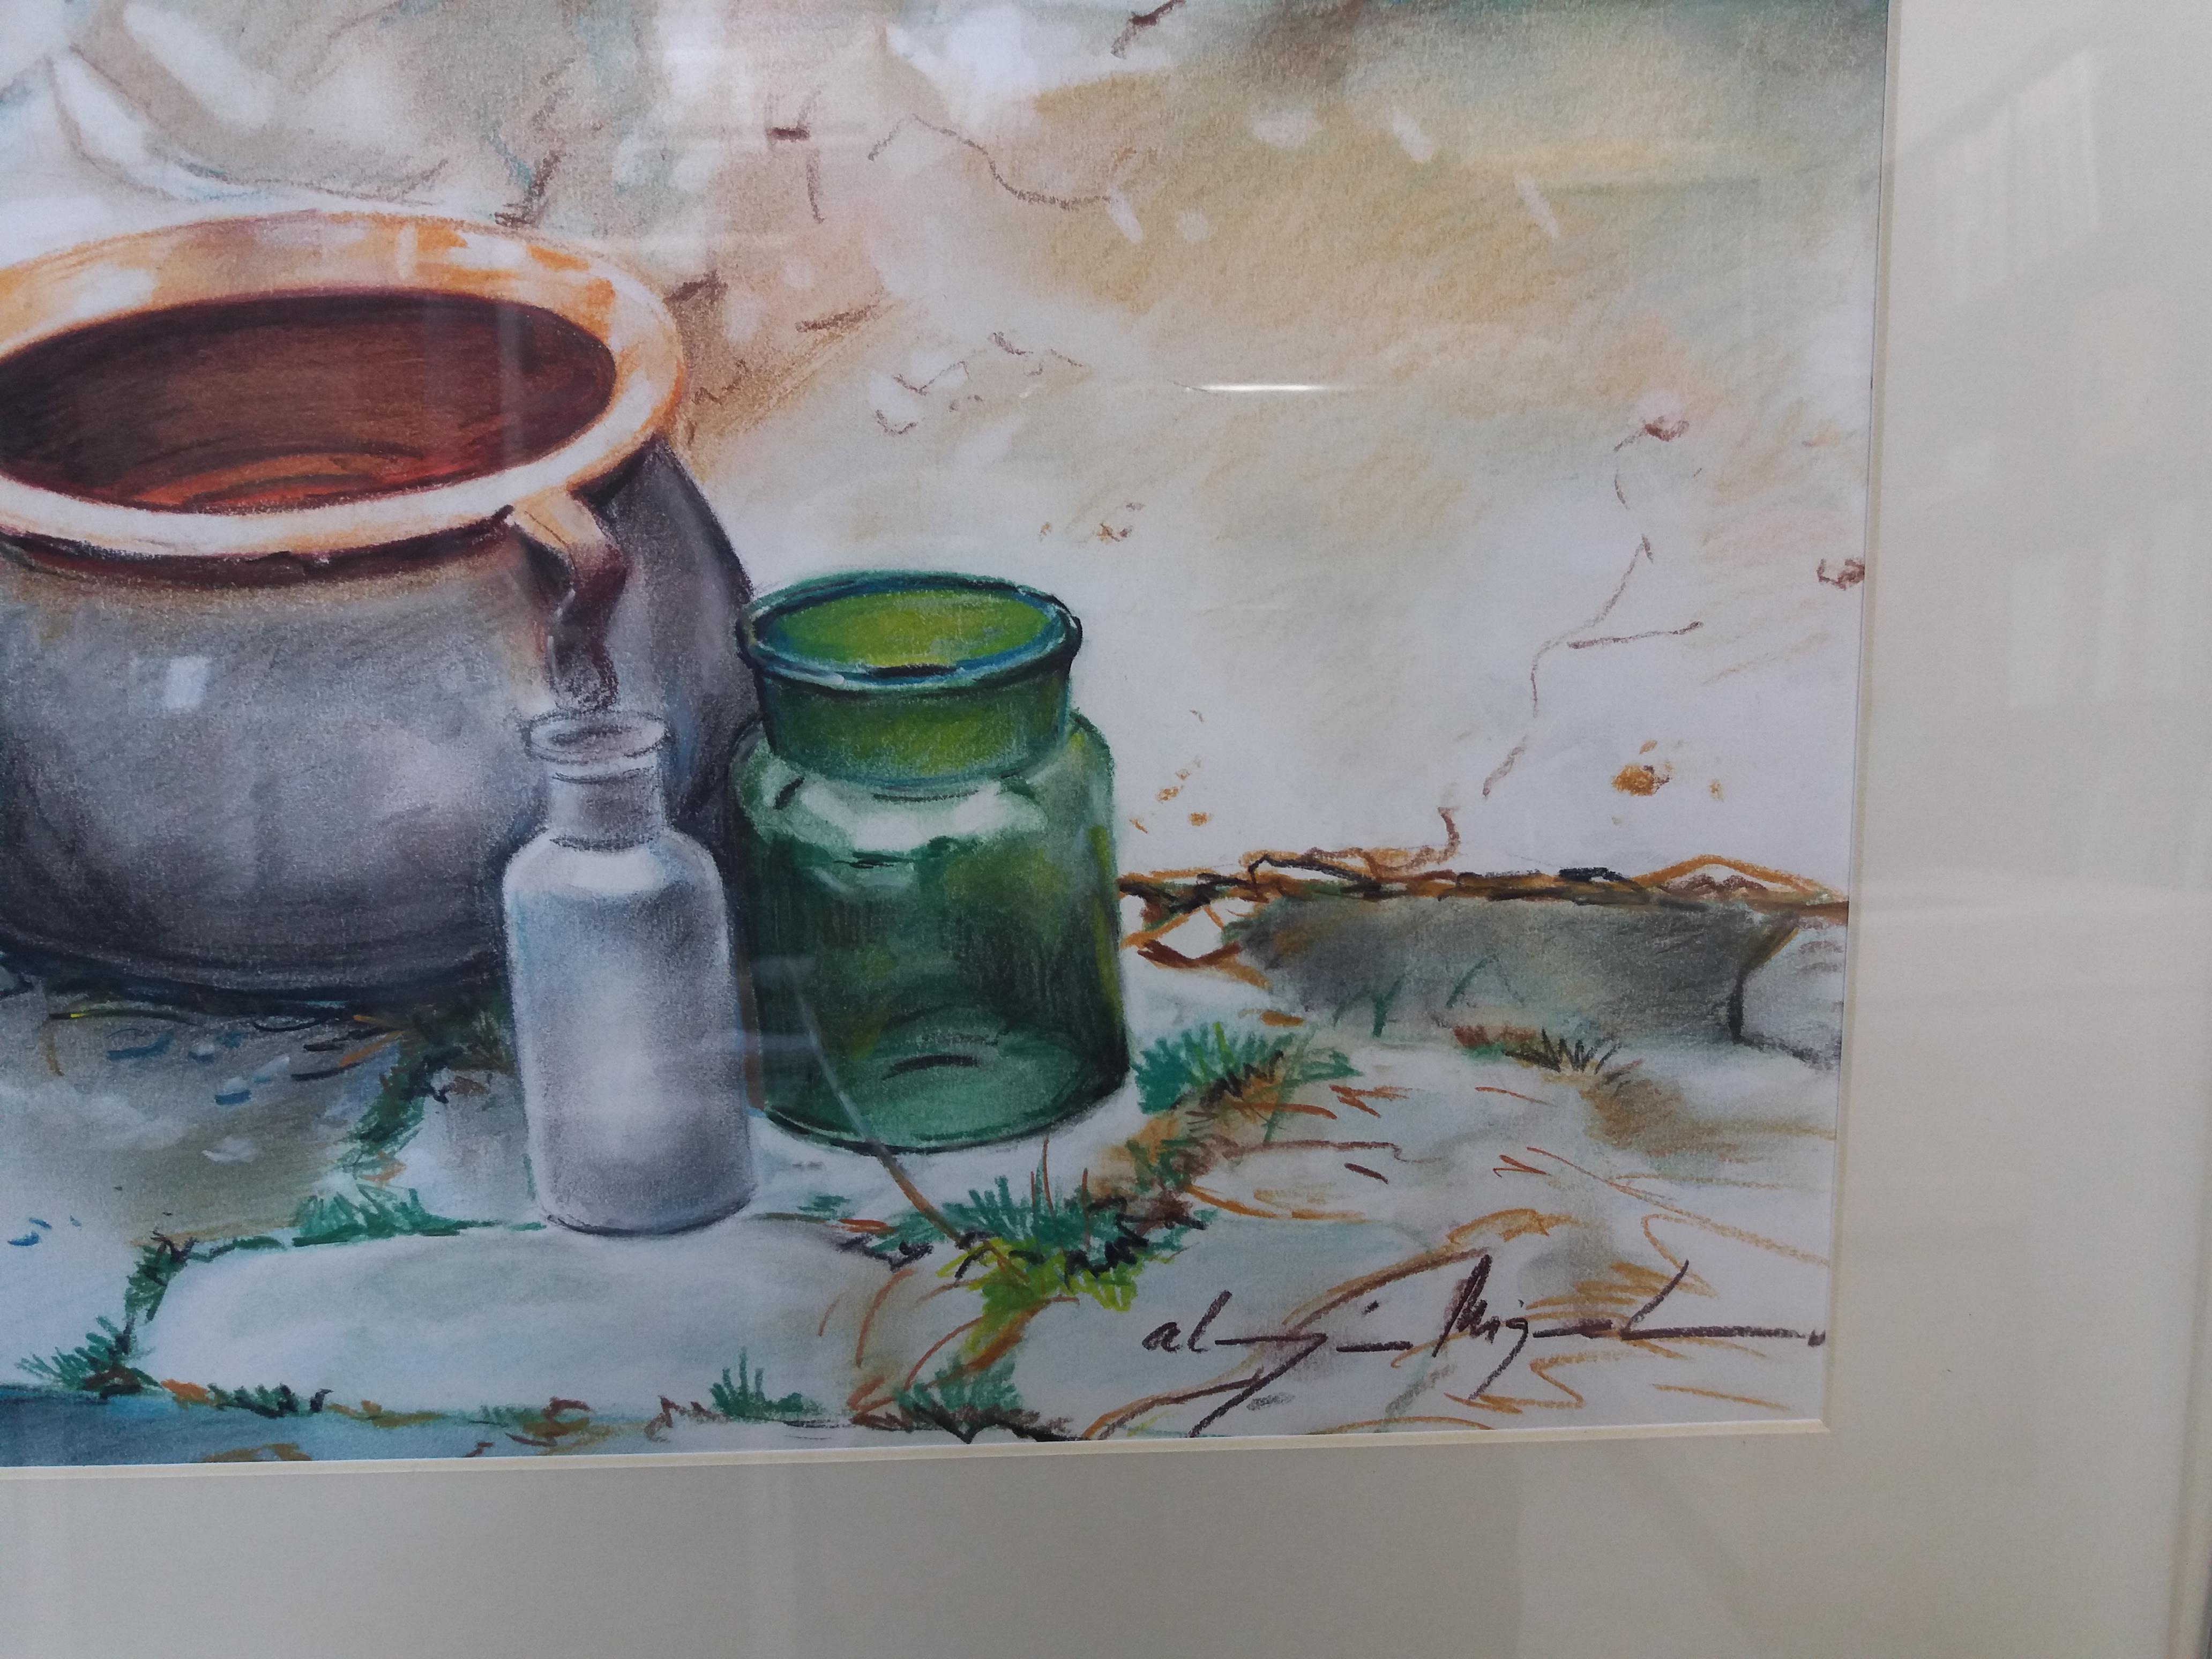 Almazan Realistic Still Life Acrylic Painting  framed
 MIQUEL was an artist focused on the art of realism. His structured works on his great mastery of drawing, are romantic and translates us to past times ...
Beautiful works on paper.
